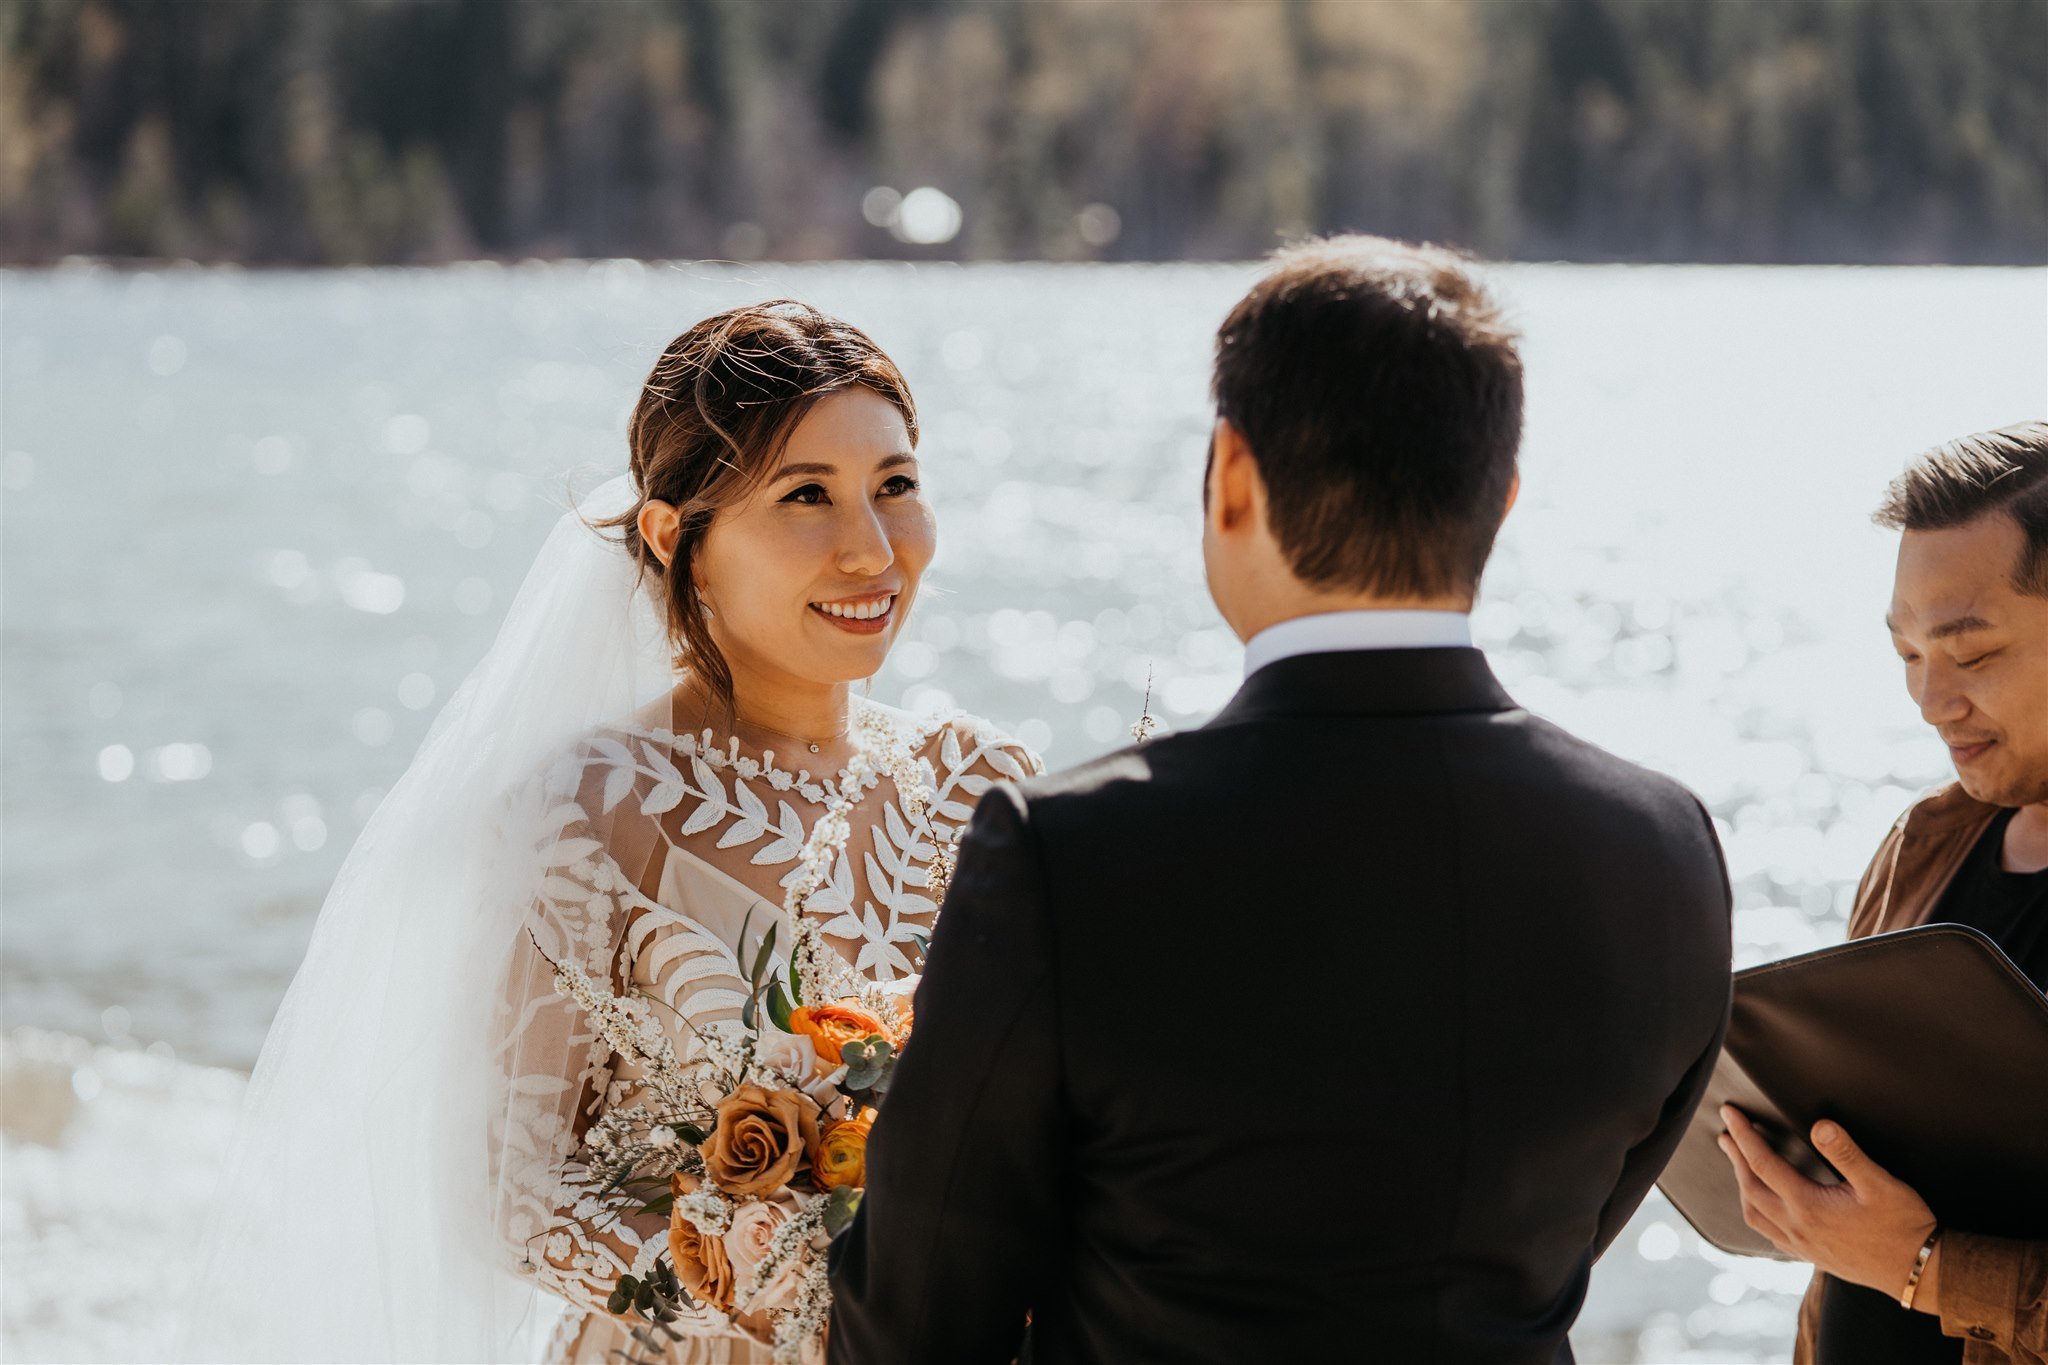 Bride looking at groom and smiling during Lake Wenatchee elopement ceremony